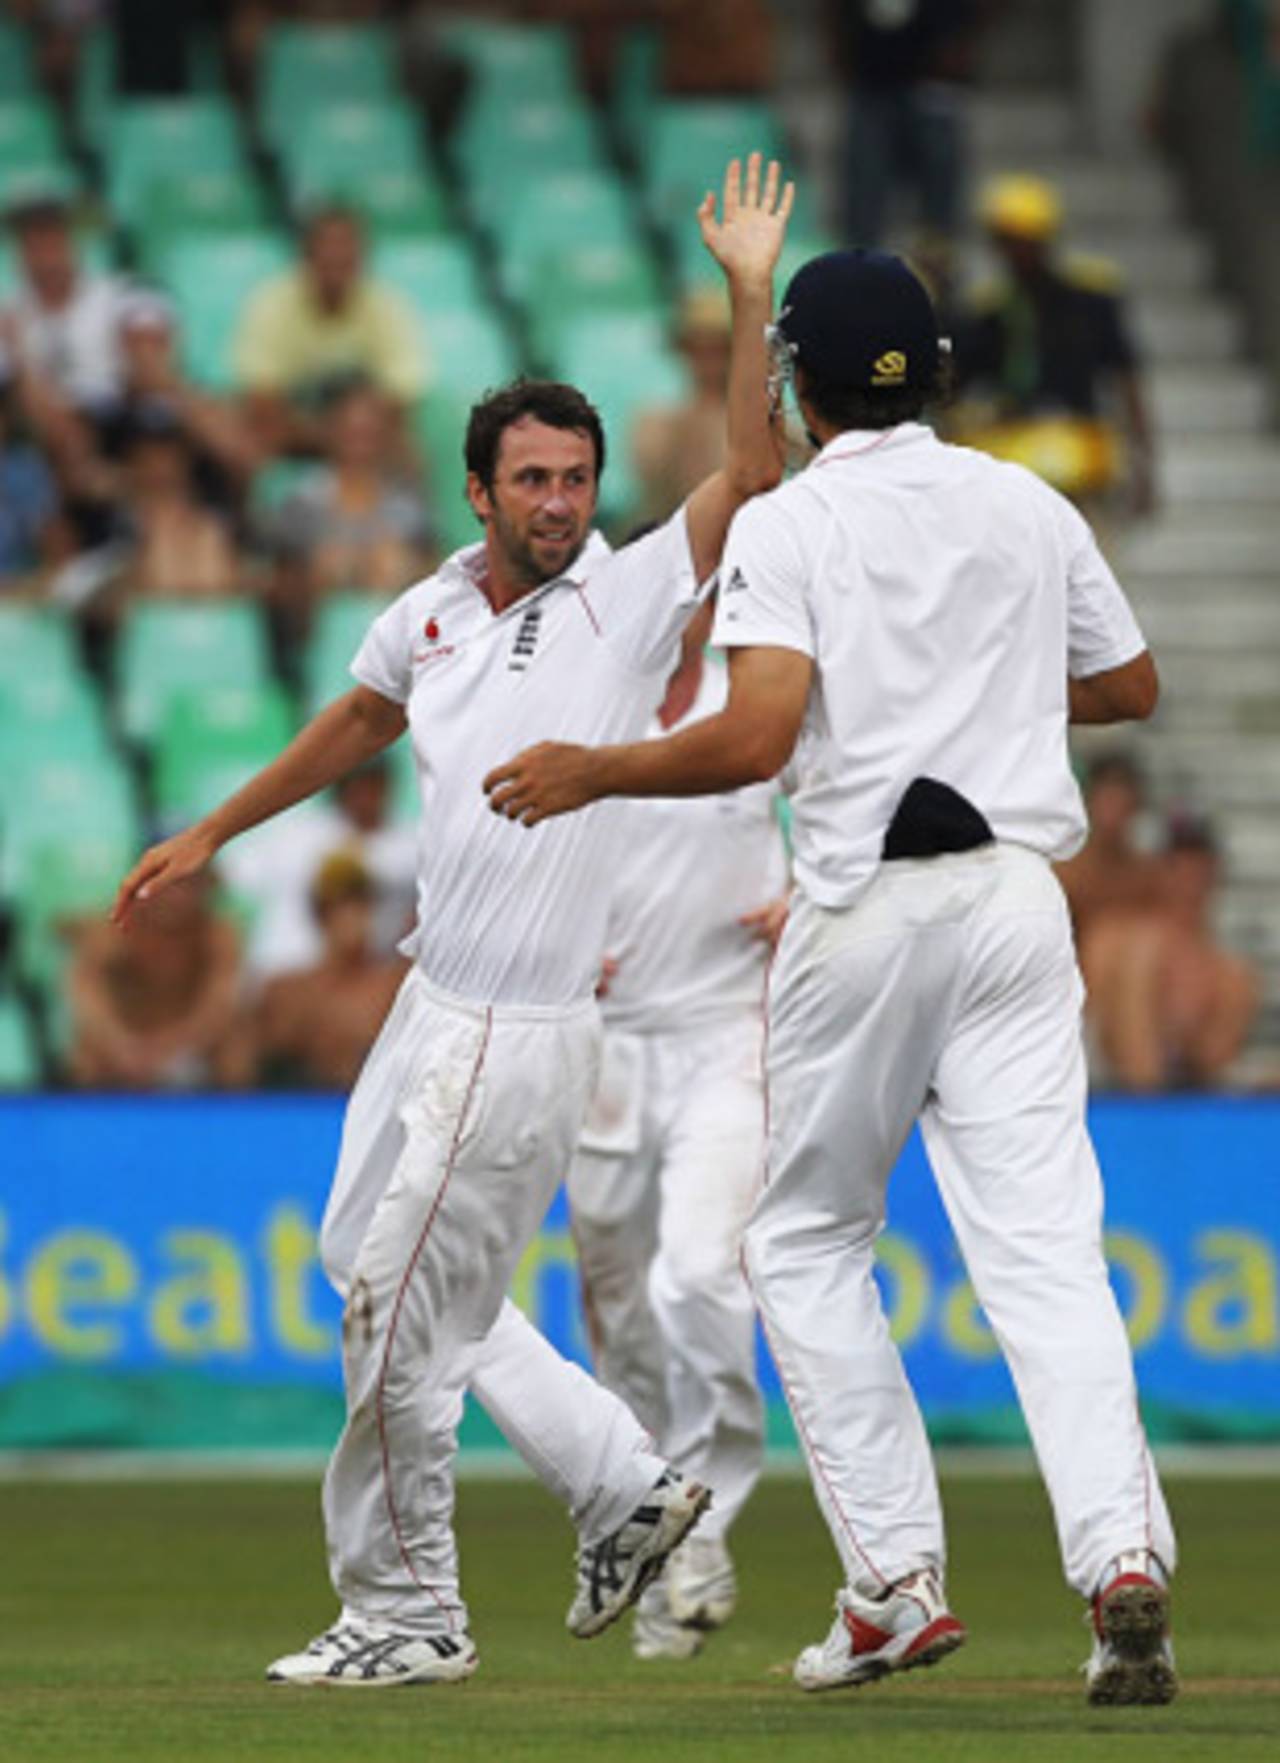 Graham Onions bowled well all day and was finally rewarded when he had JP Duminy out lbw, South Africa v England, 2nd Test, Durban, December 26, 2009